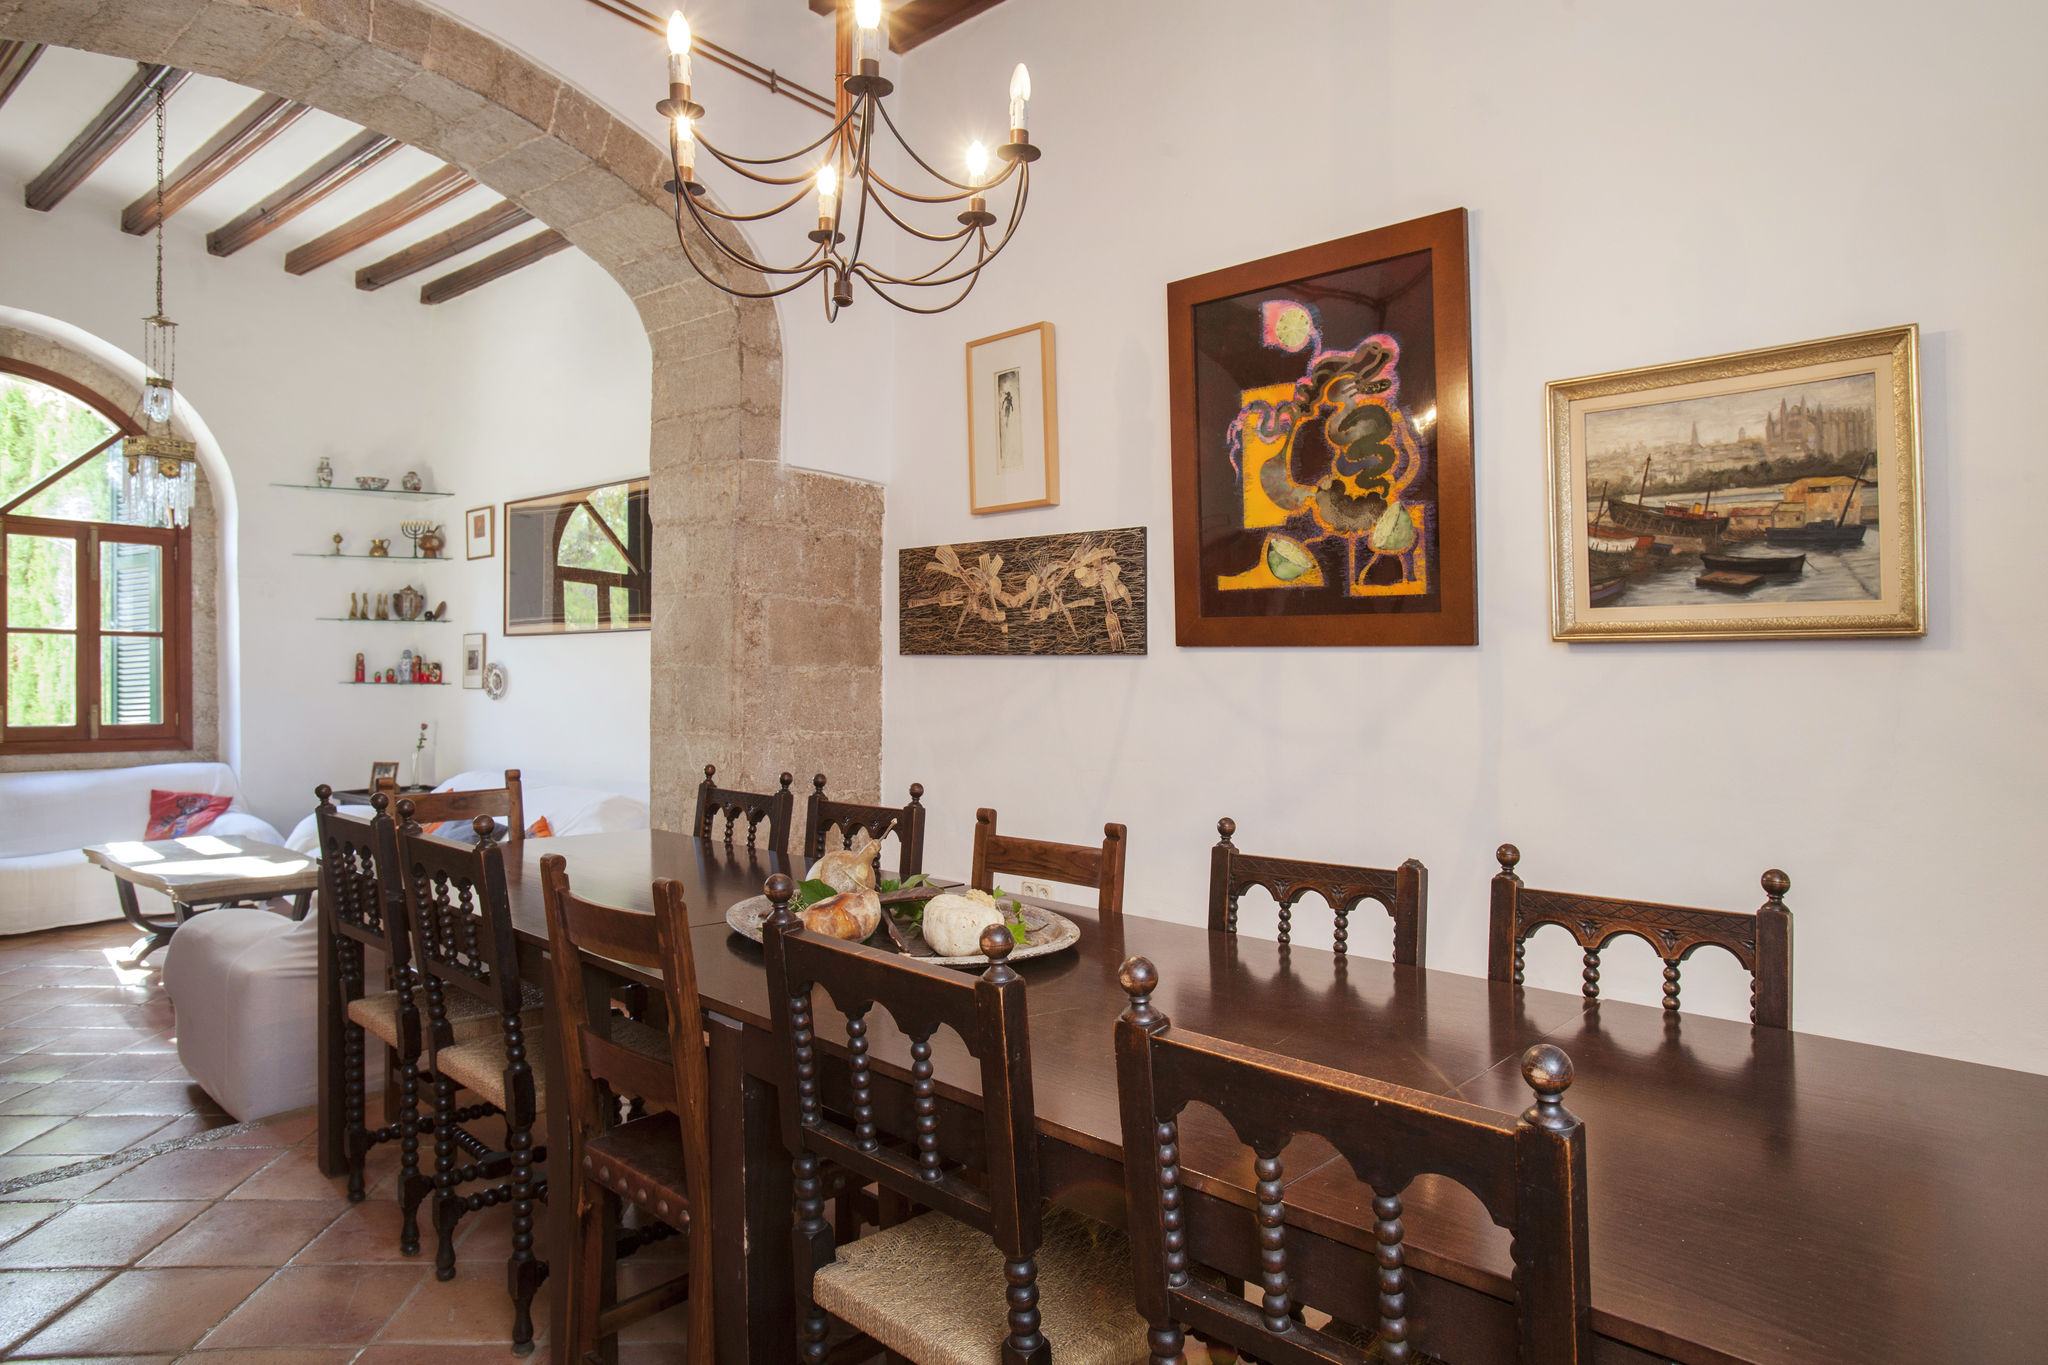 Large 18-century stylish manor house at the foot of the Tramuntana mountains